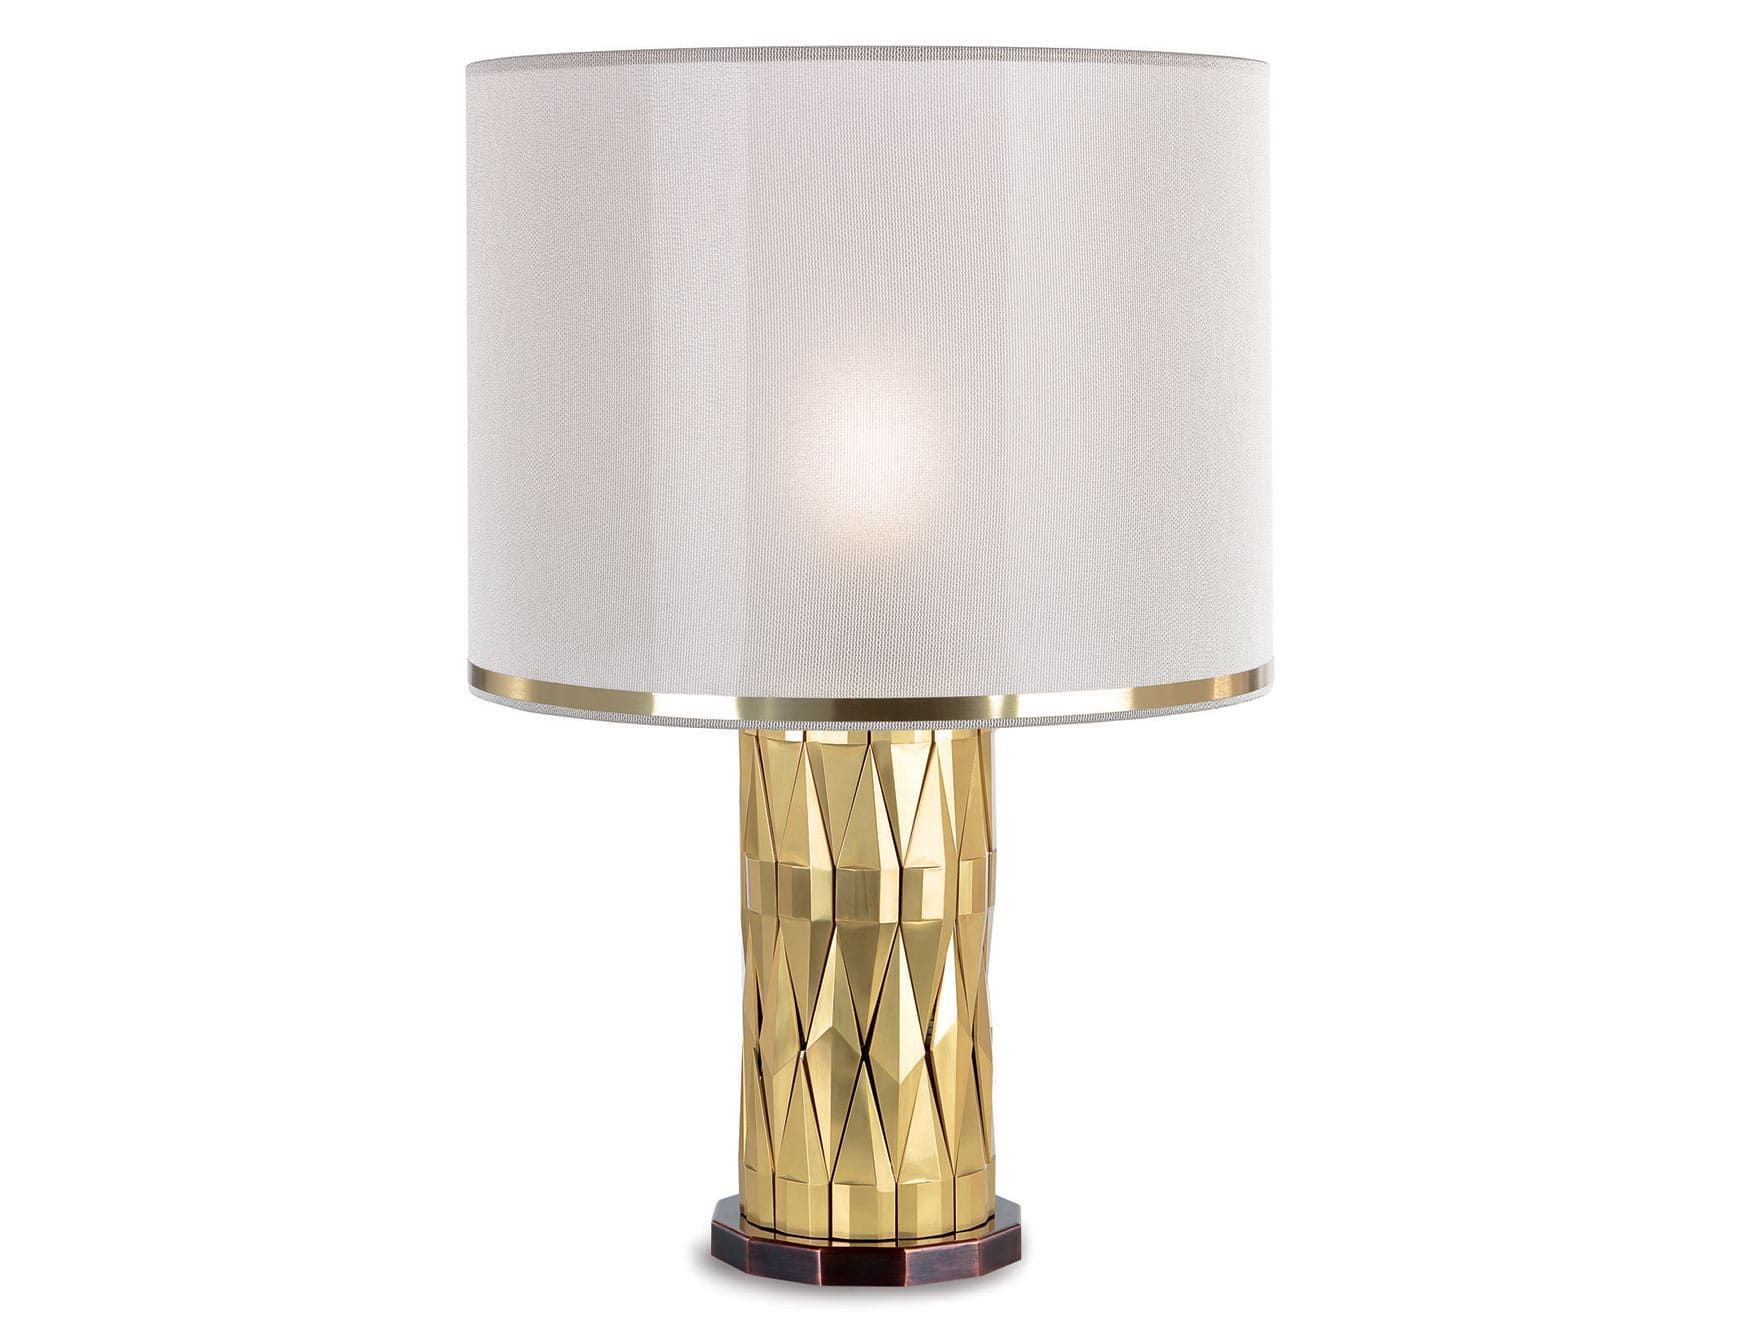 Flaire modern Italian table lamp with ivory metal